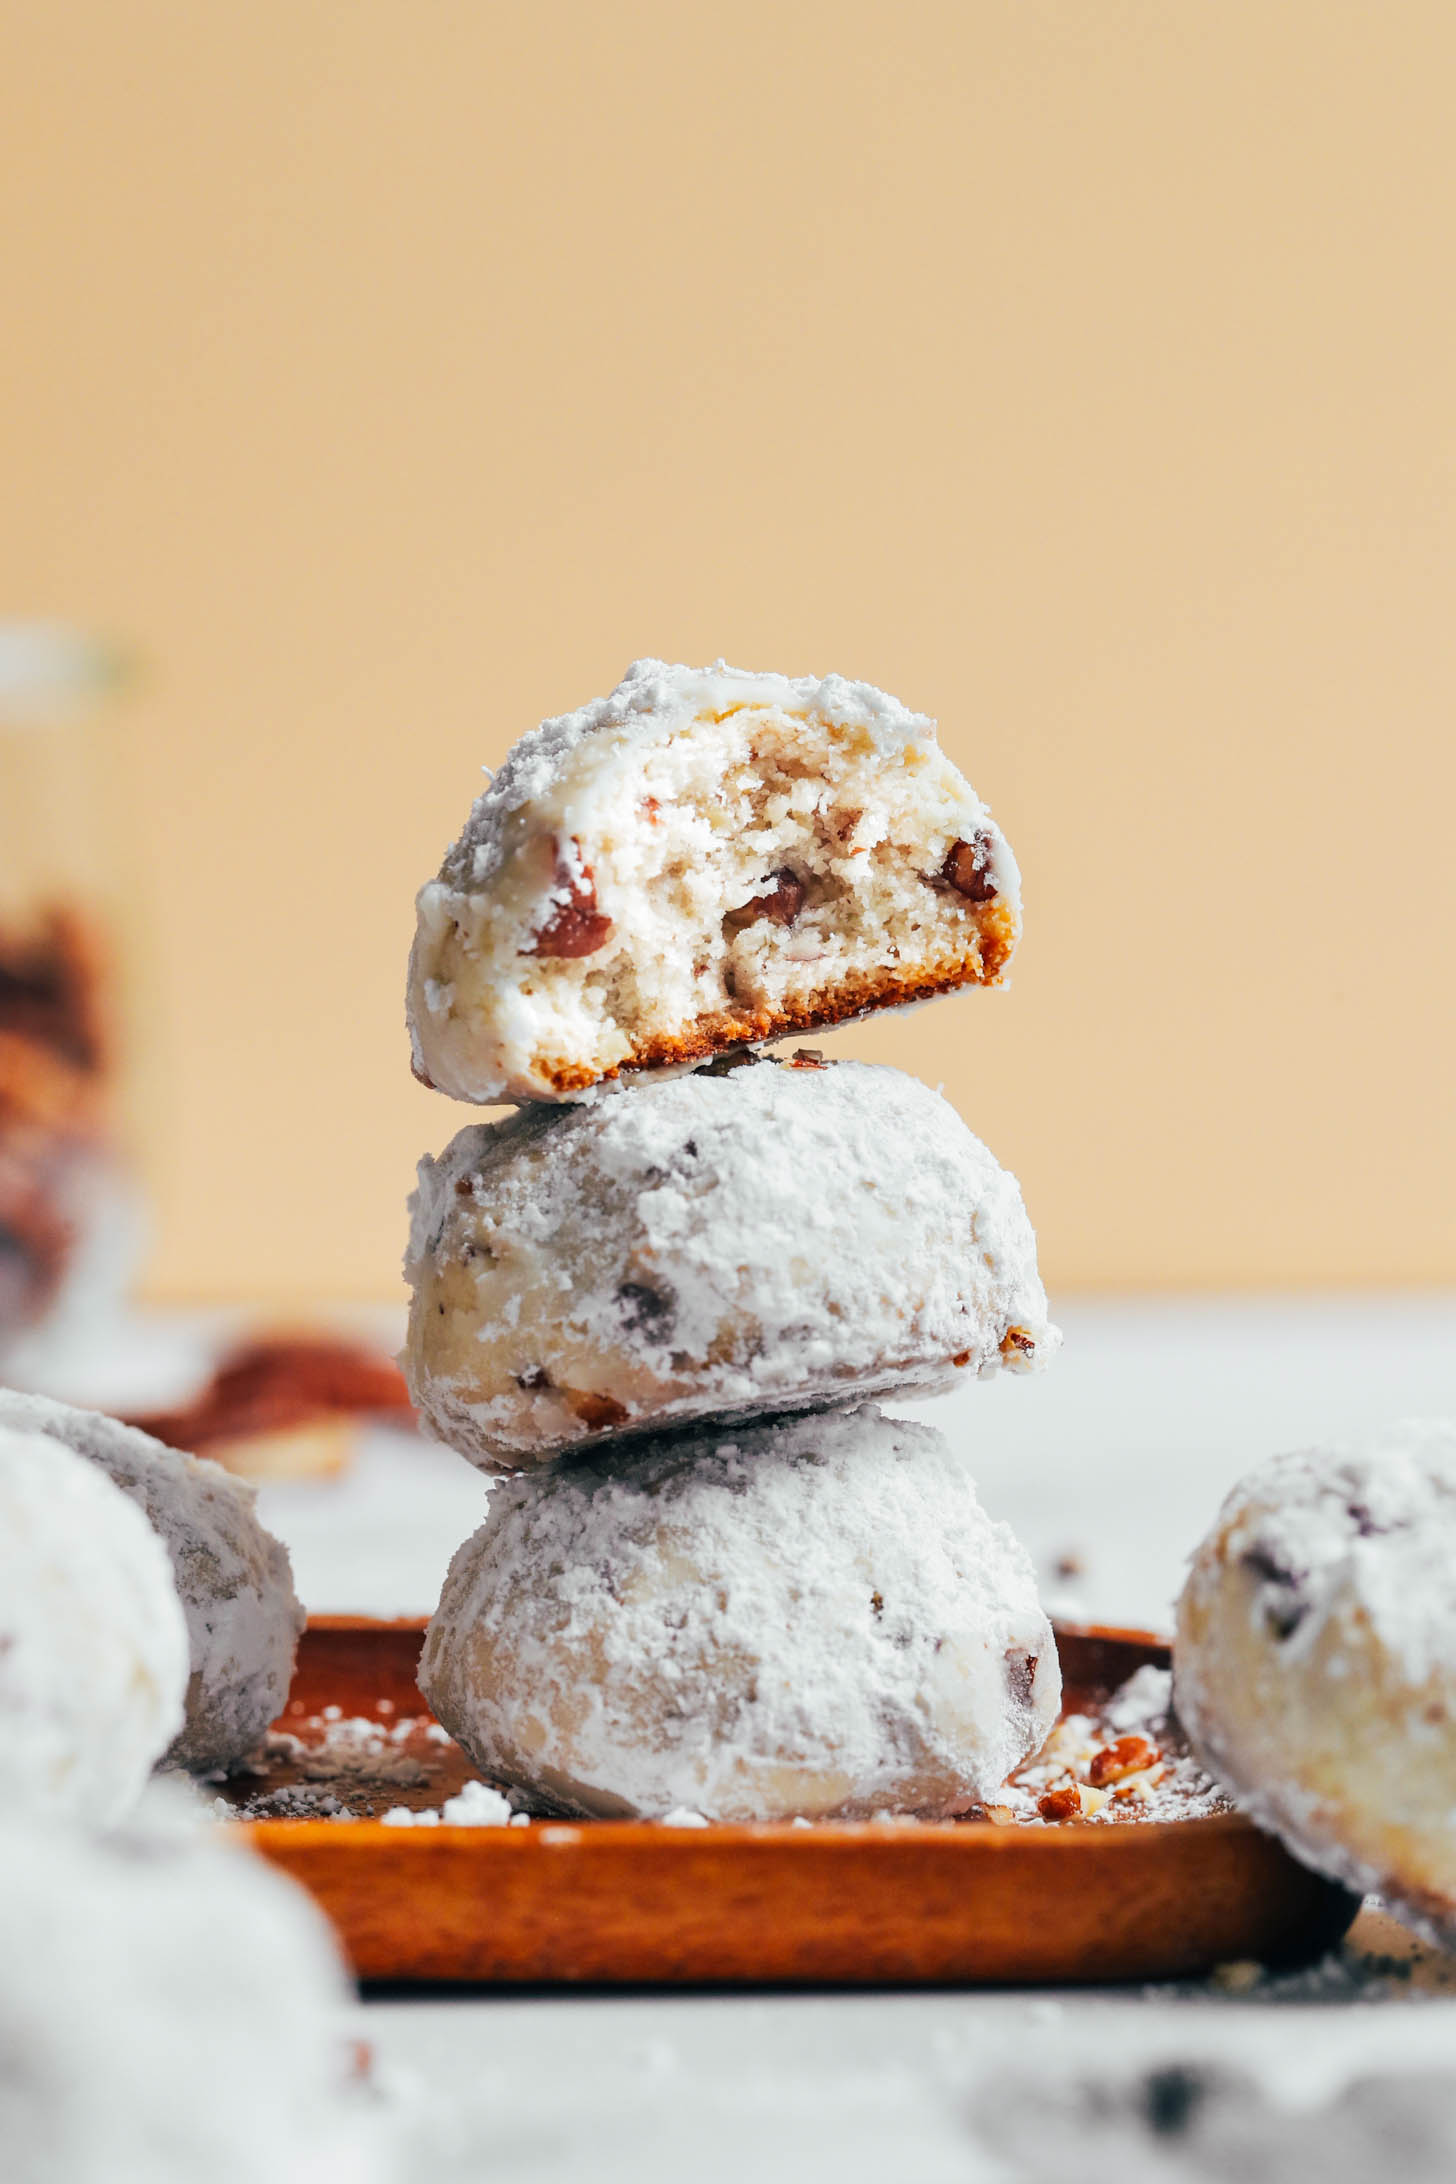 Stack of vegan gluten-free Mexican wedding cookies with the top one partially eaten